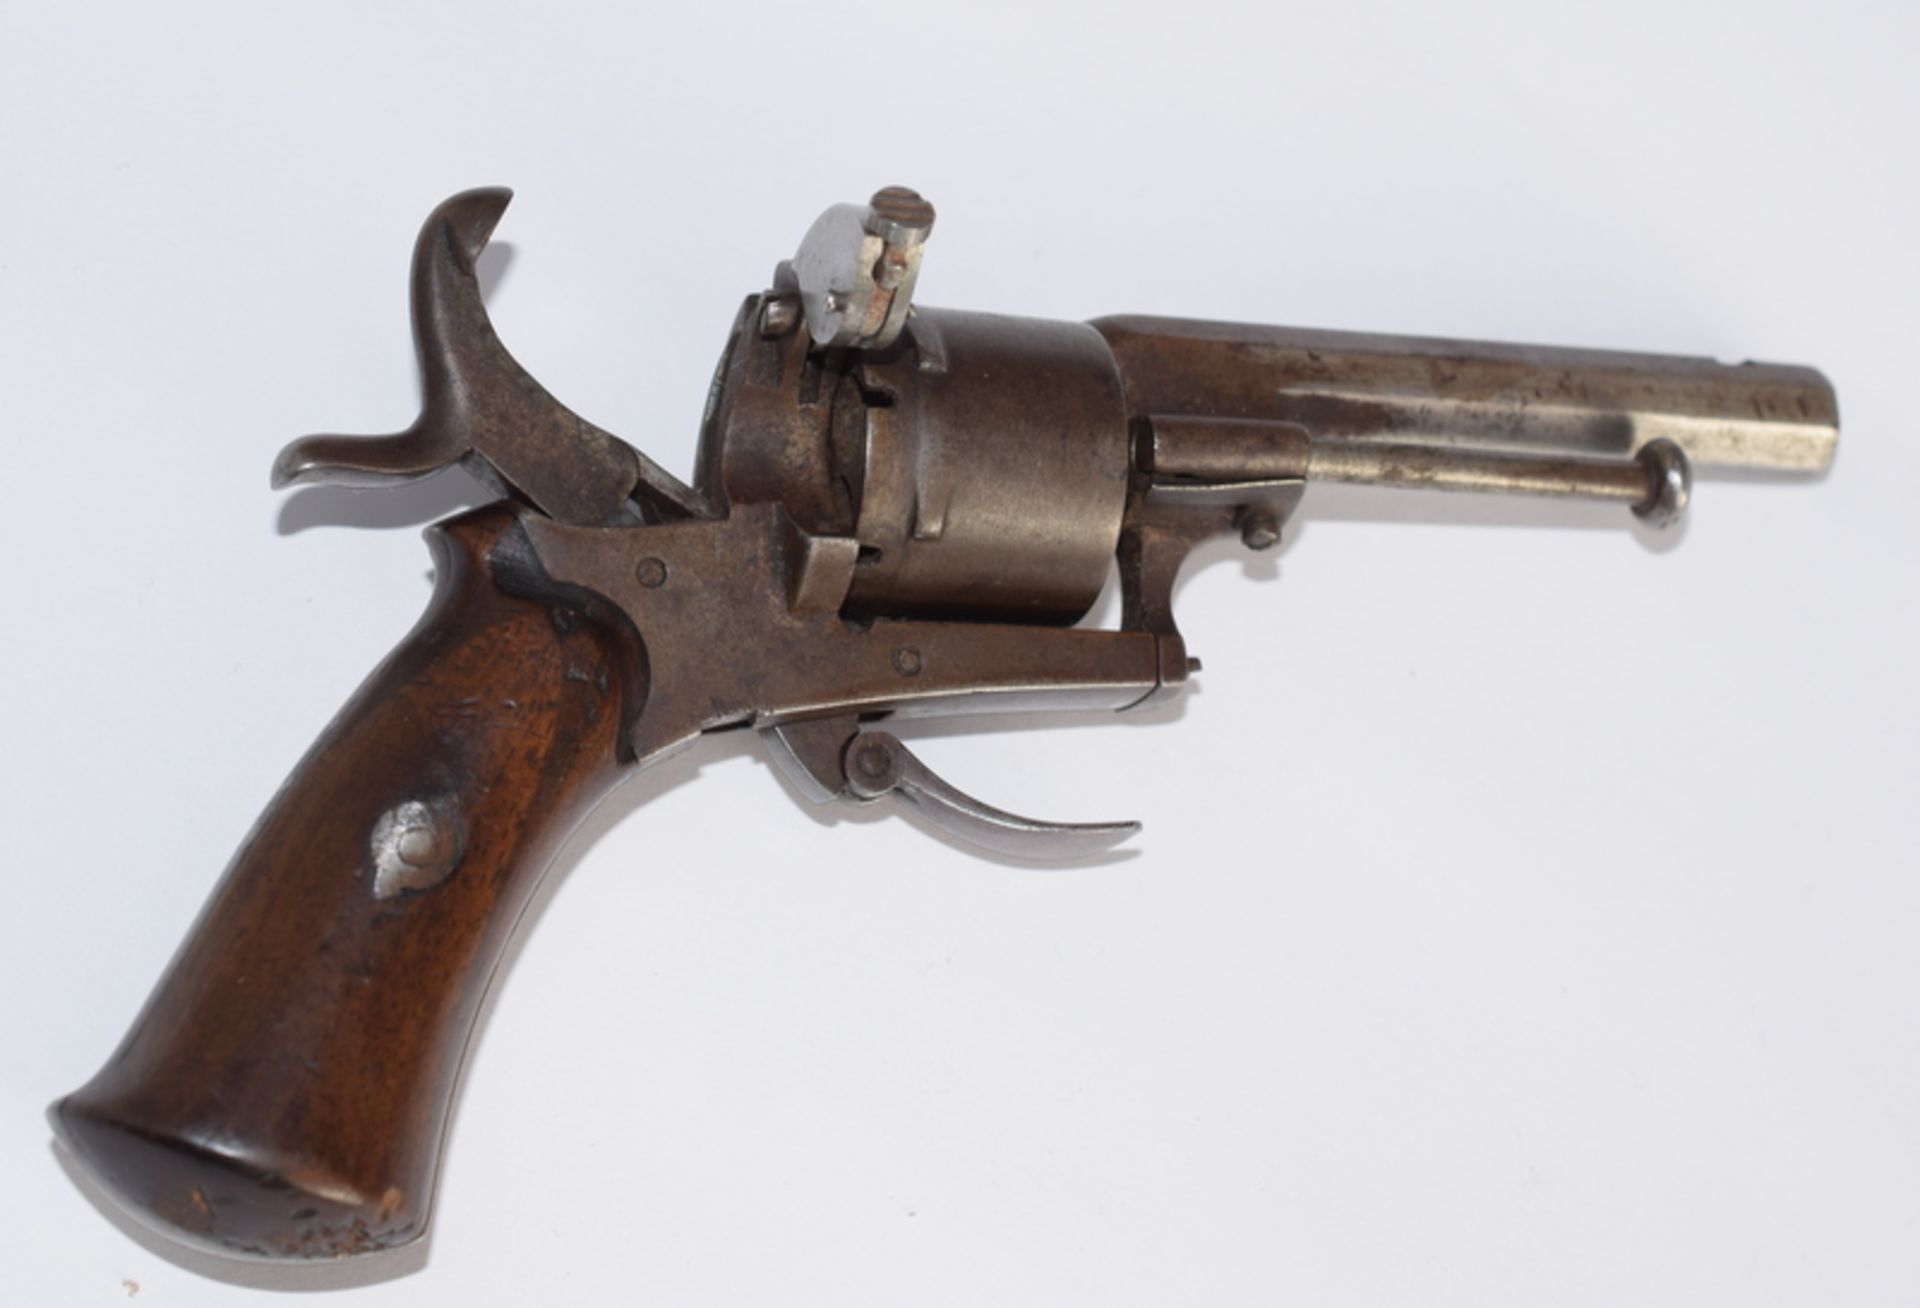 Antique Continental Pinfire Revolver Pistol 7mm Obsolete Calibre - Image 6 of 8